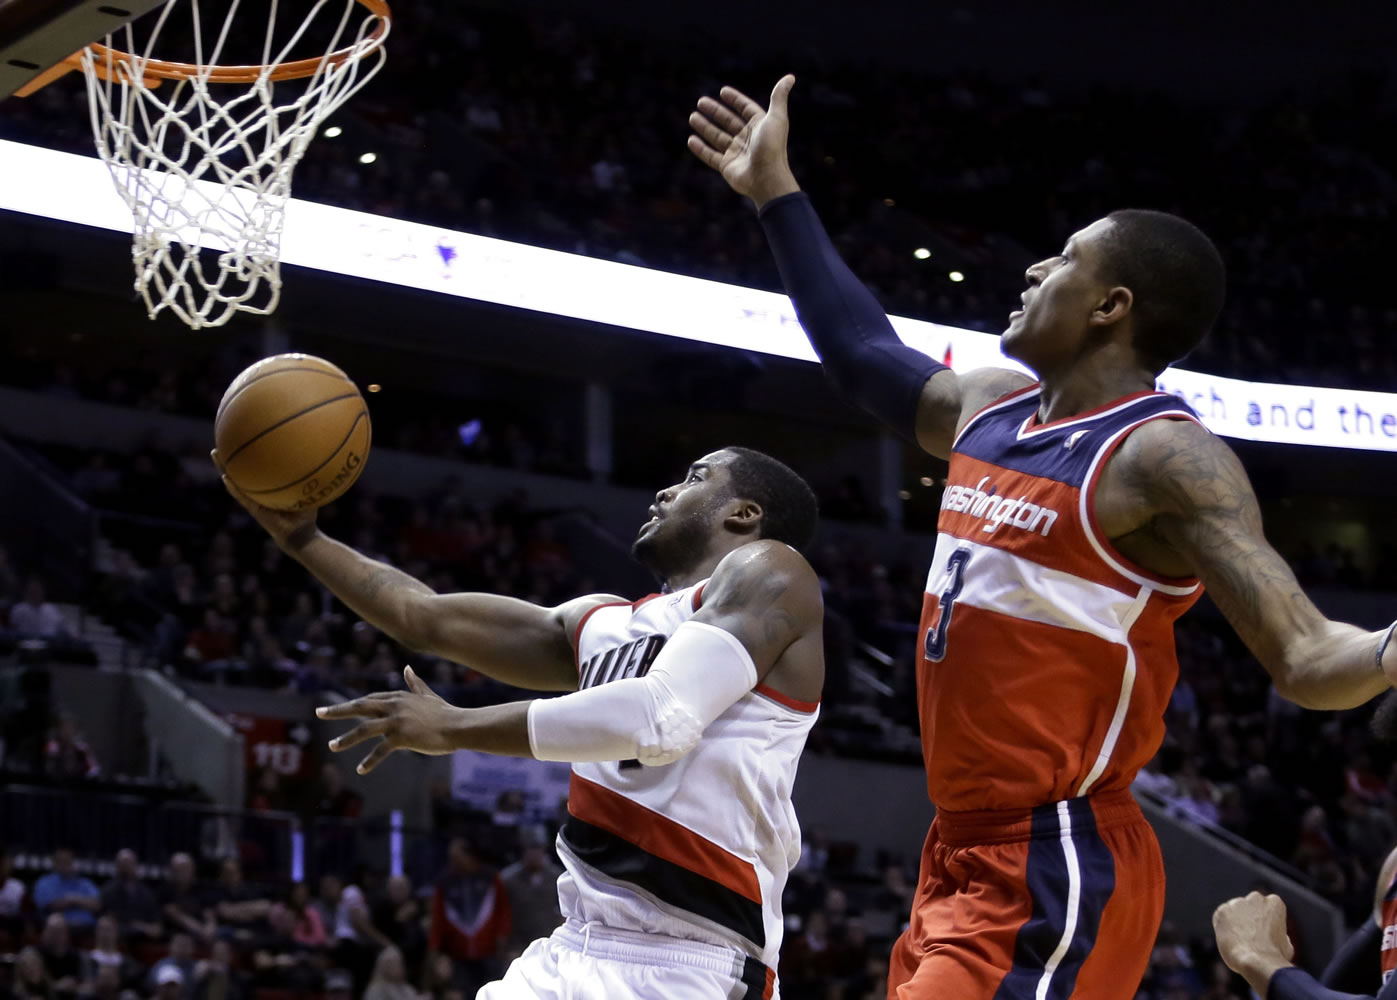 Portland Trail Blazers guard Wesley Matthews, left, drives to the basket past Washington Wizards guard Bradley Beal during the second half Thursday. Matthews led the Trail Blazers with 28 points as they won 116-103.